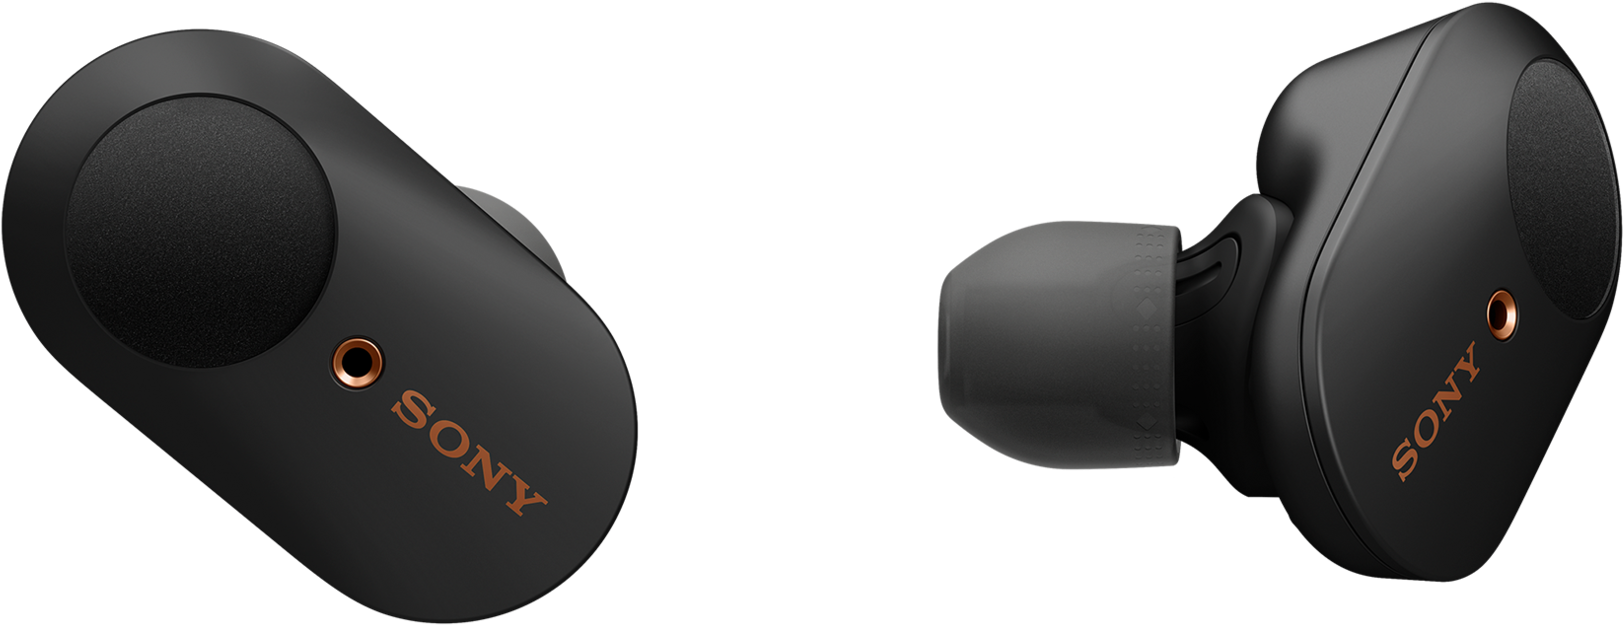 A Pair Of Black Earbuds